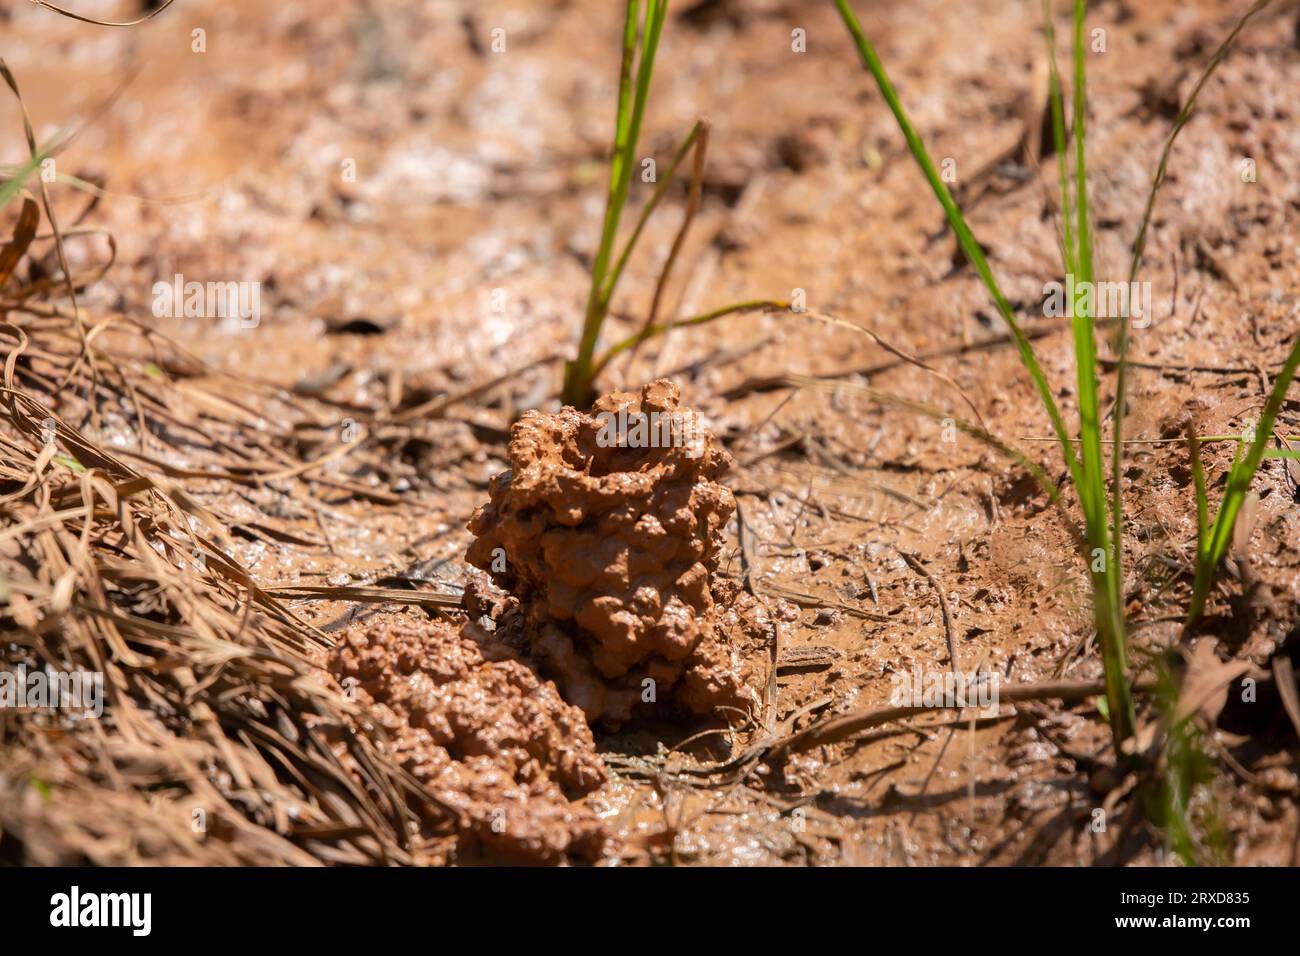 Tips of a digger crawfish's (Creaserinus fodiens) pincers barely visible in  its chimney Stock Photo - Alamy